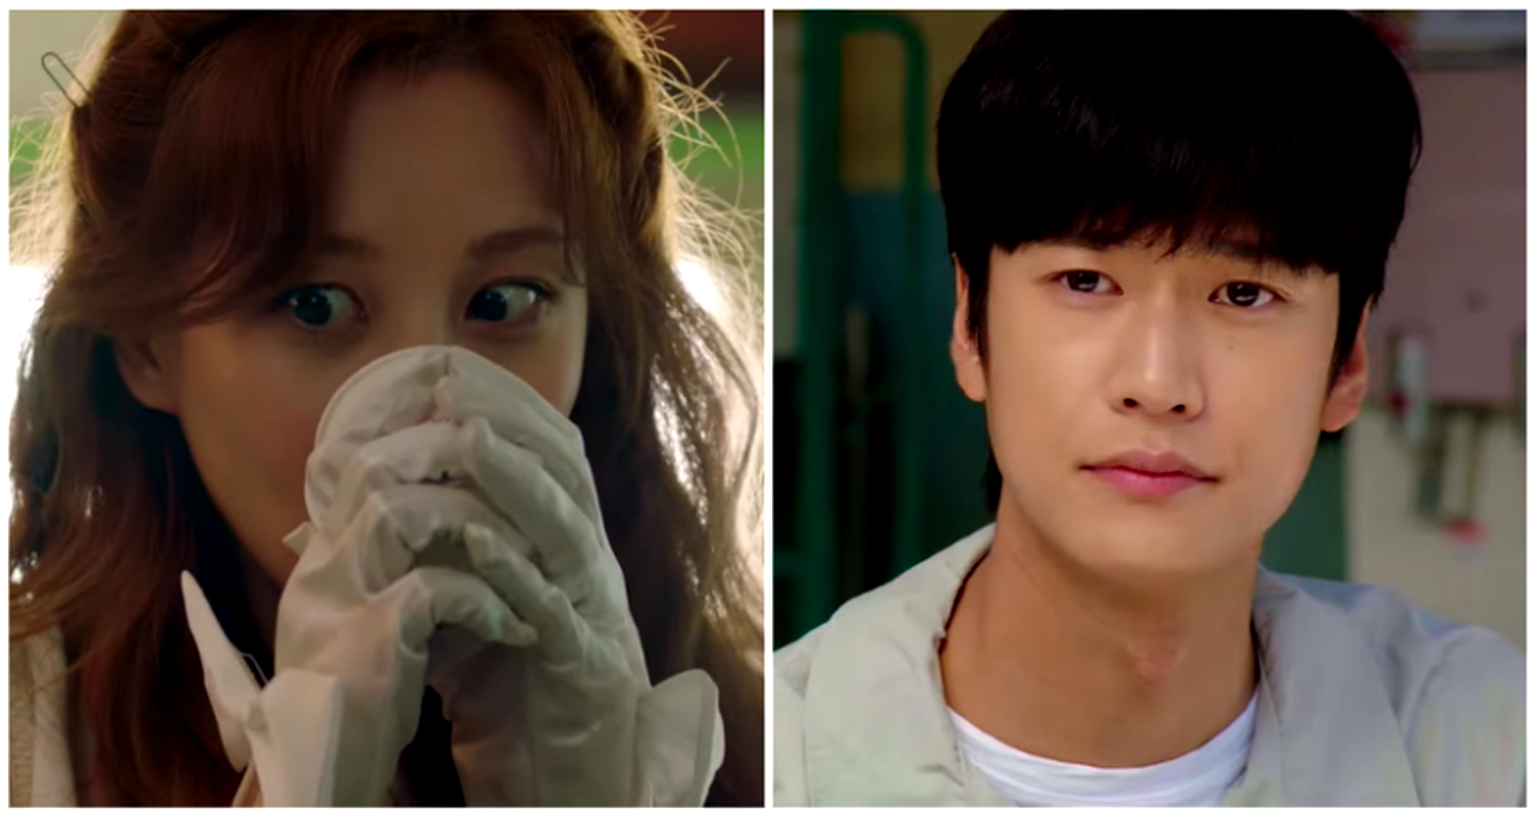 ‘The Jinx’s Lover’: New teaser released for KBS K-drama starring Seohyun of Girls’ Generation